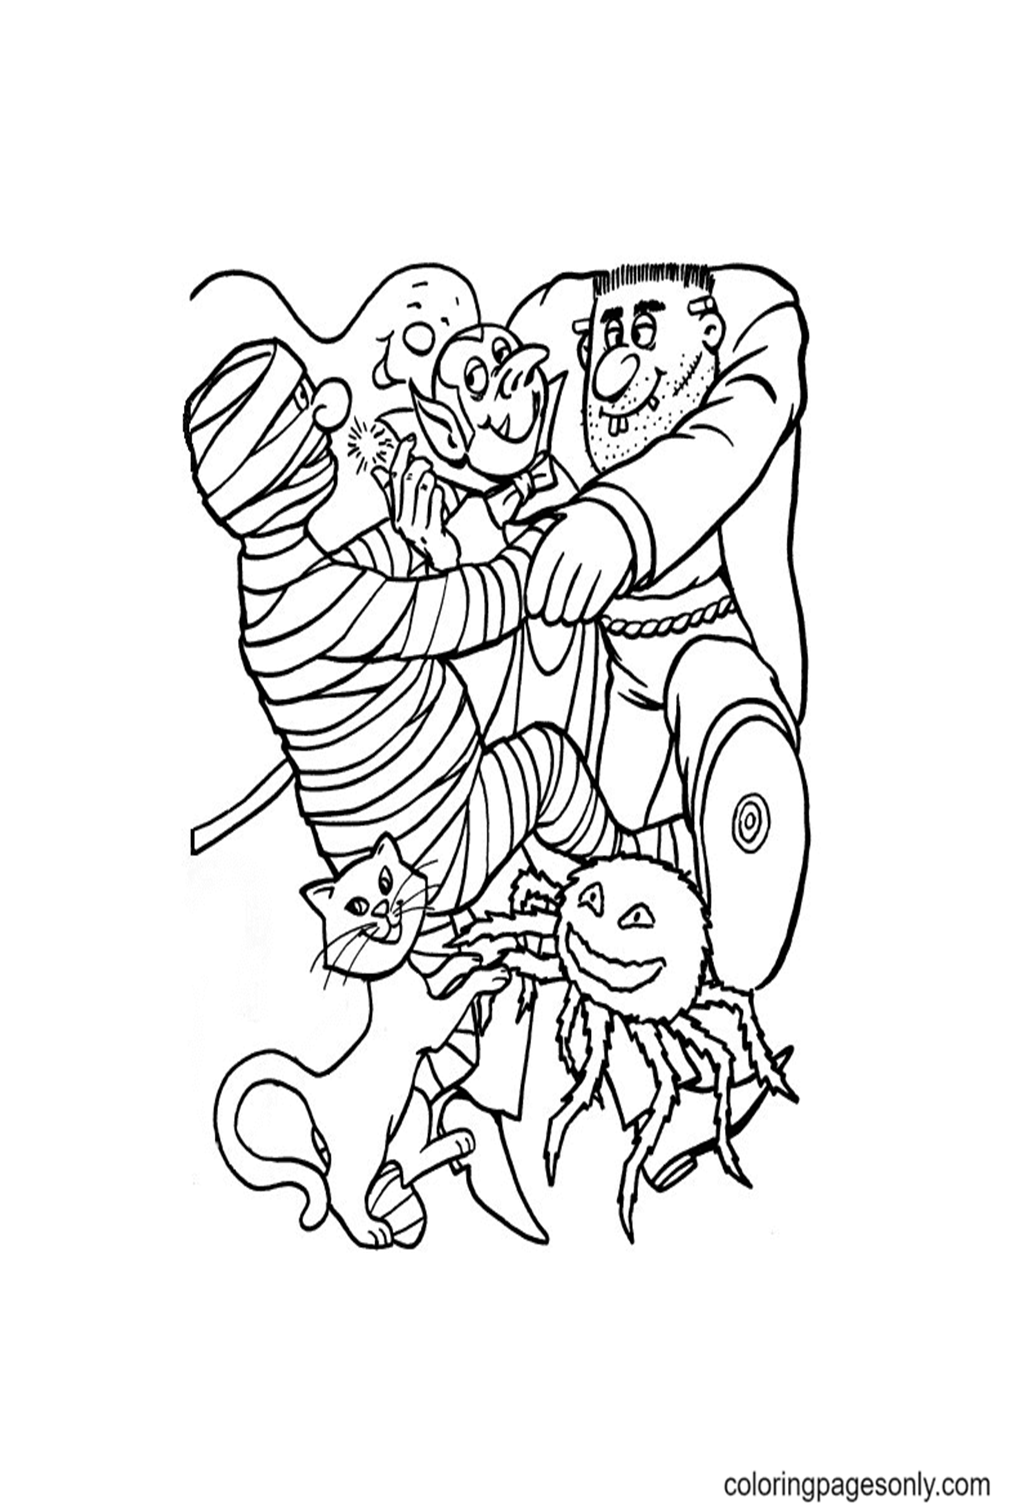 Happy Halloween Monsters Coloring Pages